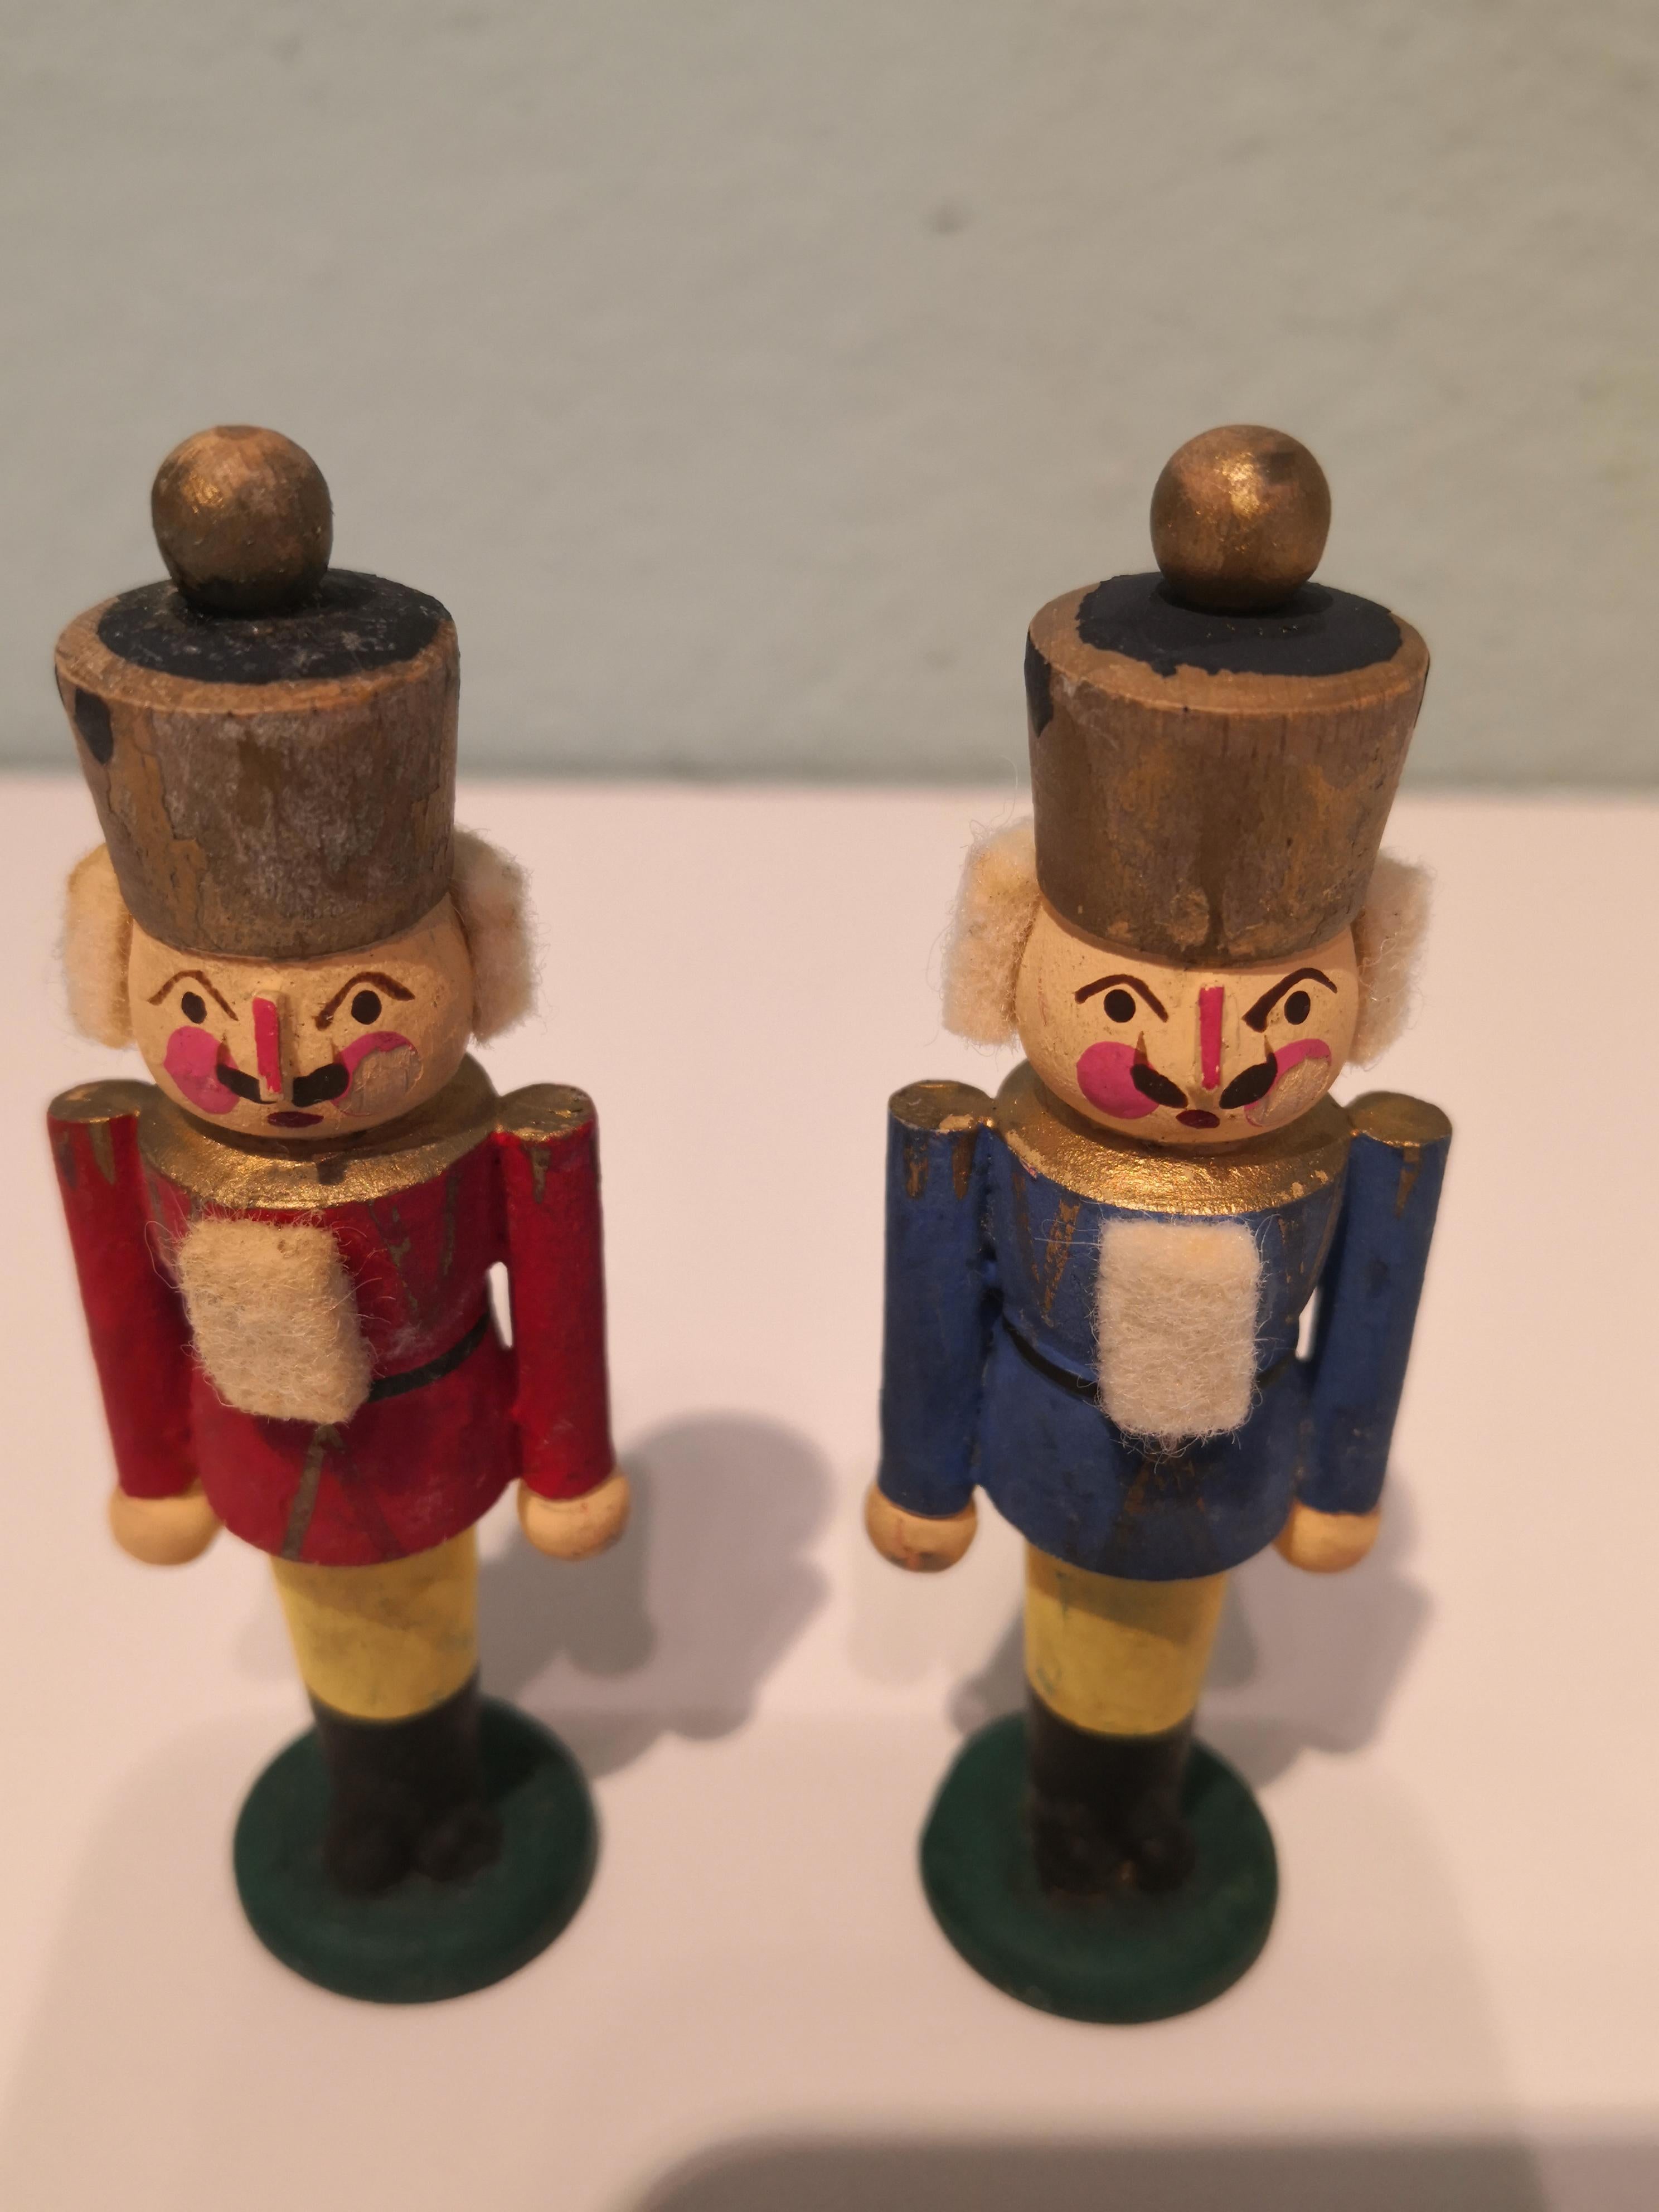 Hand-Painted Mid-20th Century Set of Five Christmas Santa Figures from Erzgebirge Germany